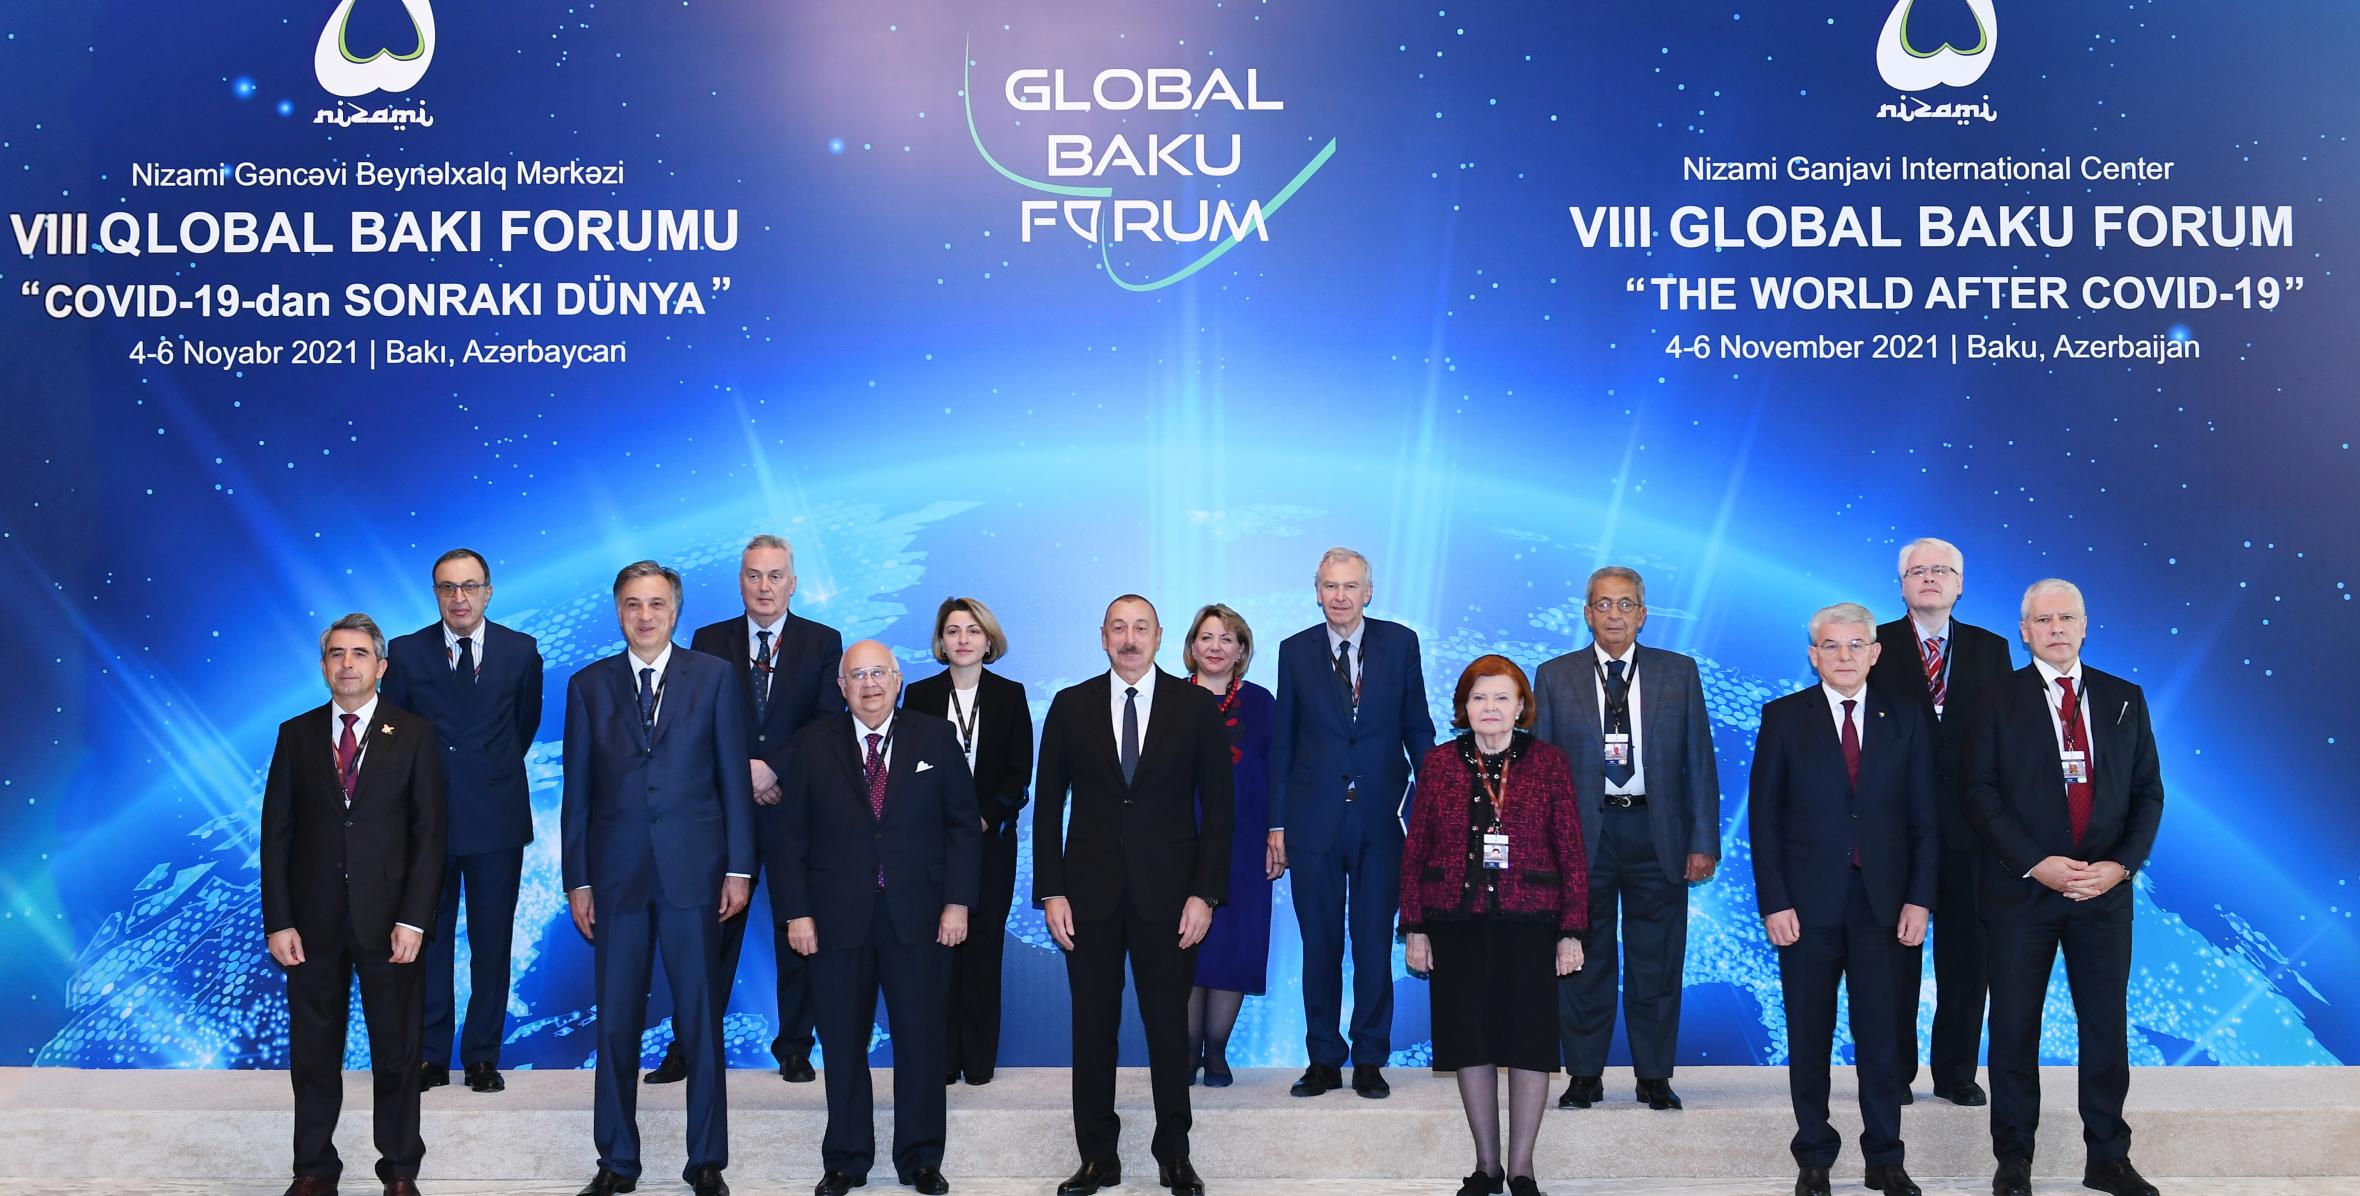 Ilham Aliyev delivered a speech at the opening of the 8th Global Baku Forum